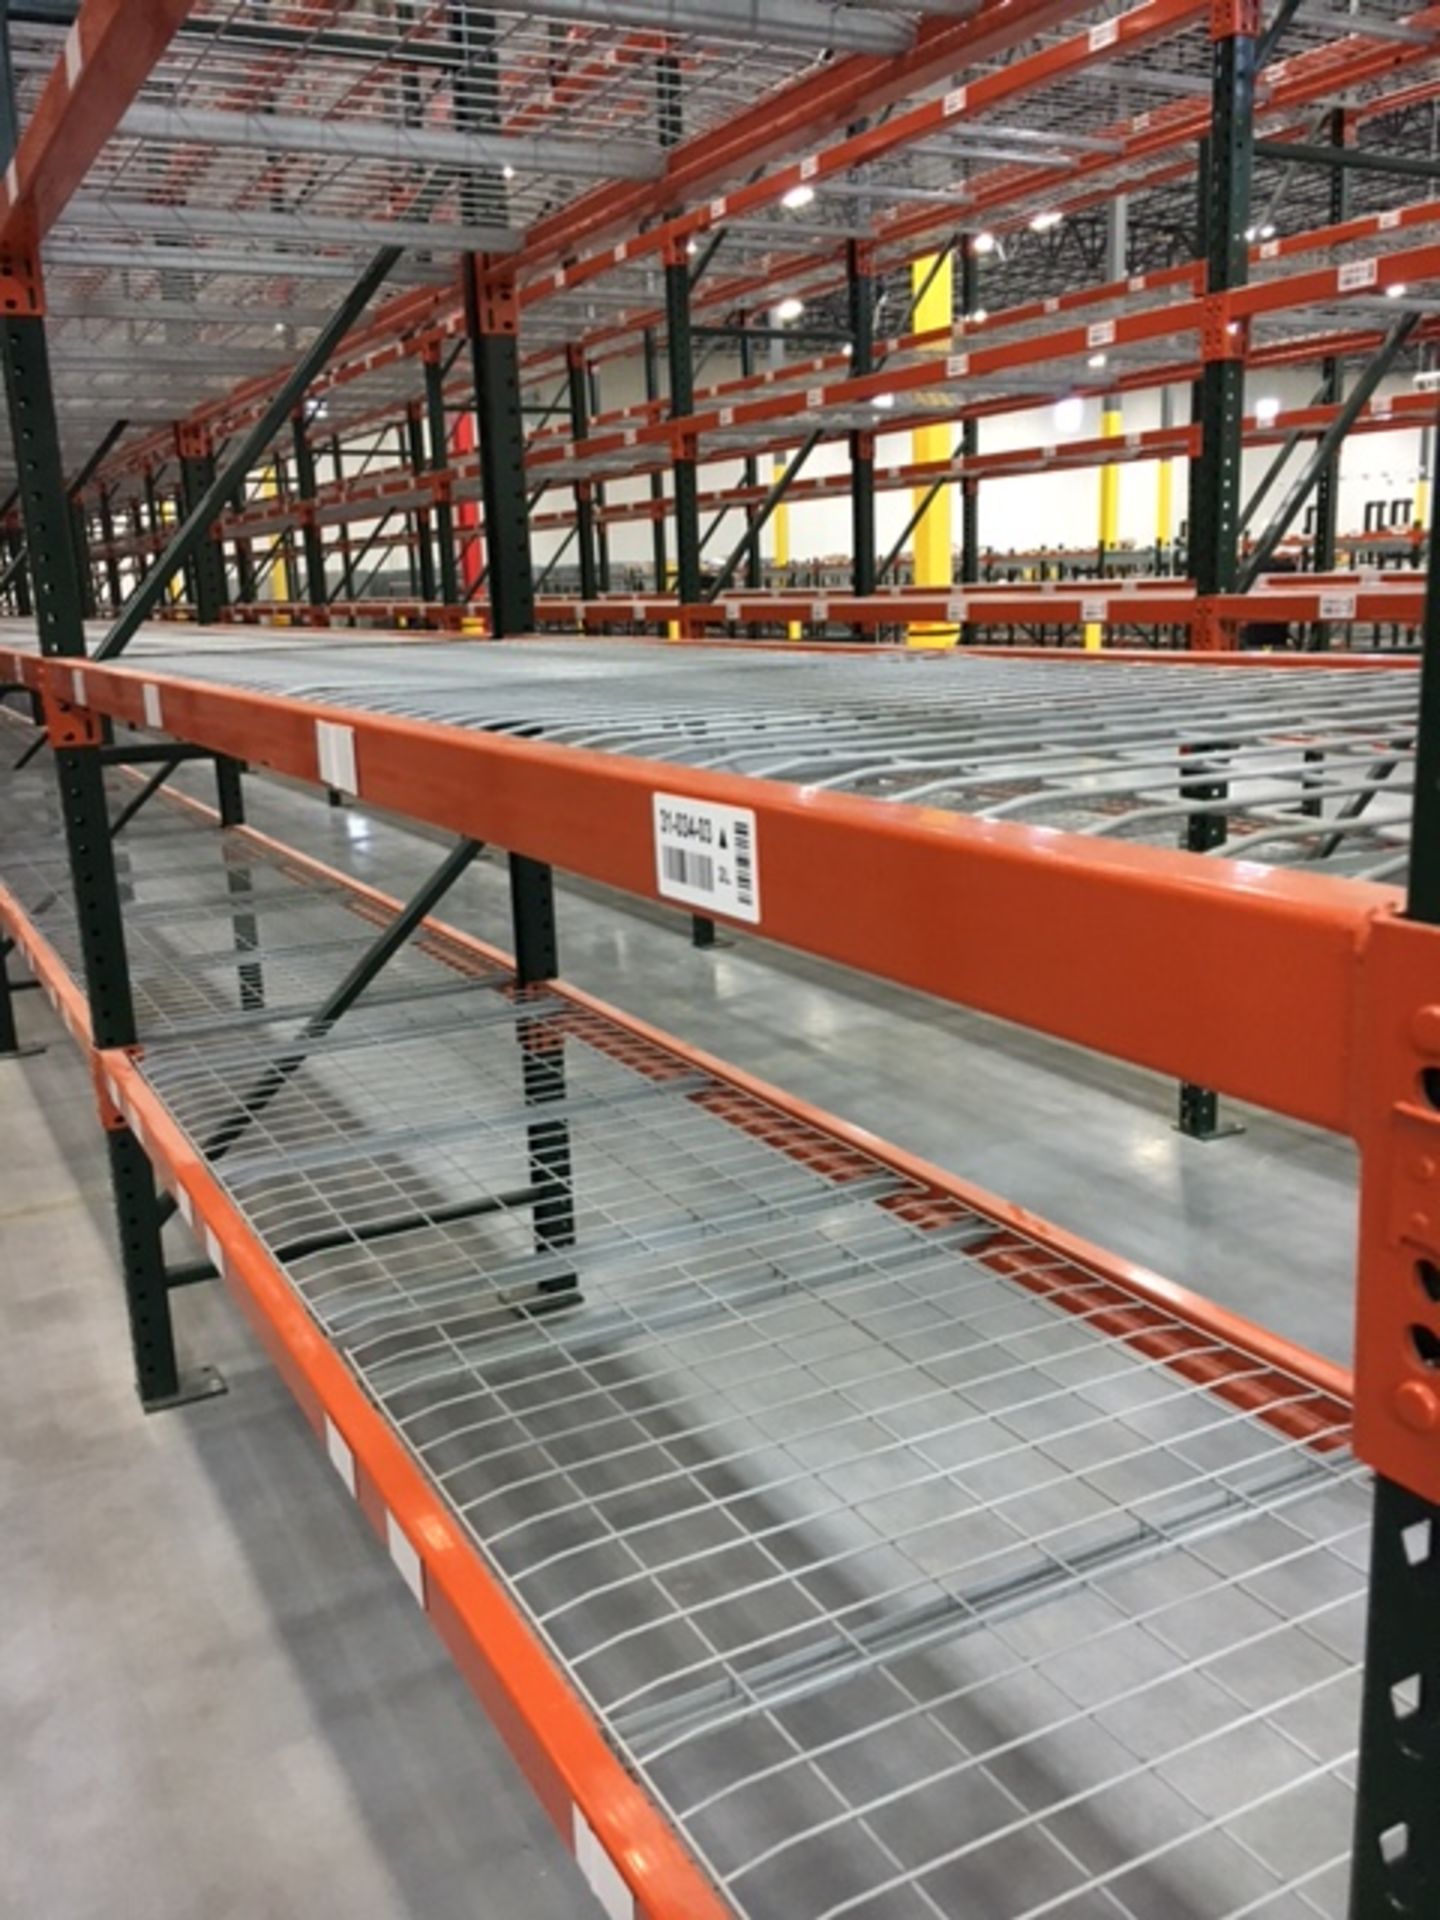 WIRE MESH DECKS FOR PALLET RACKING: 36'' X 54'' INSIDE WATERFALL (X400) - Image 3 of 3